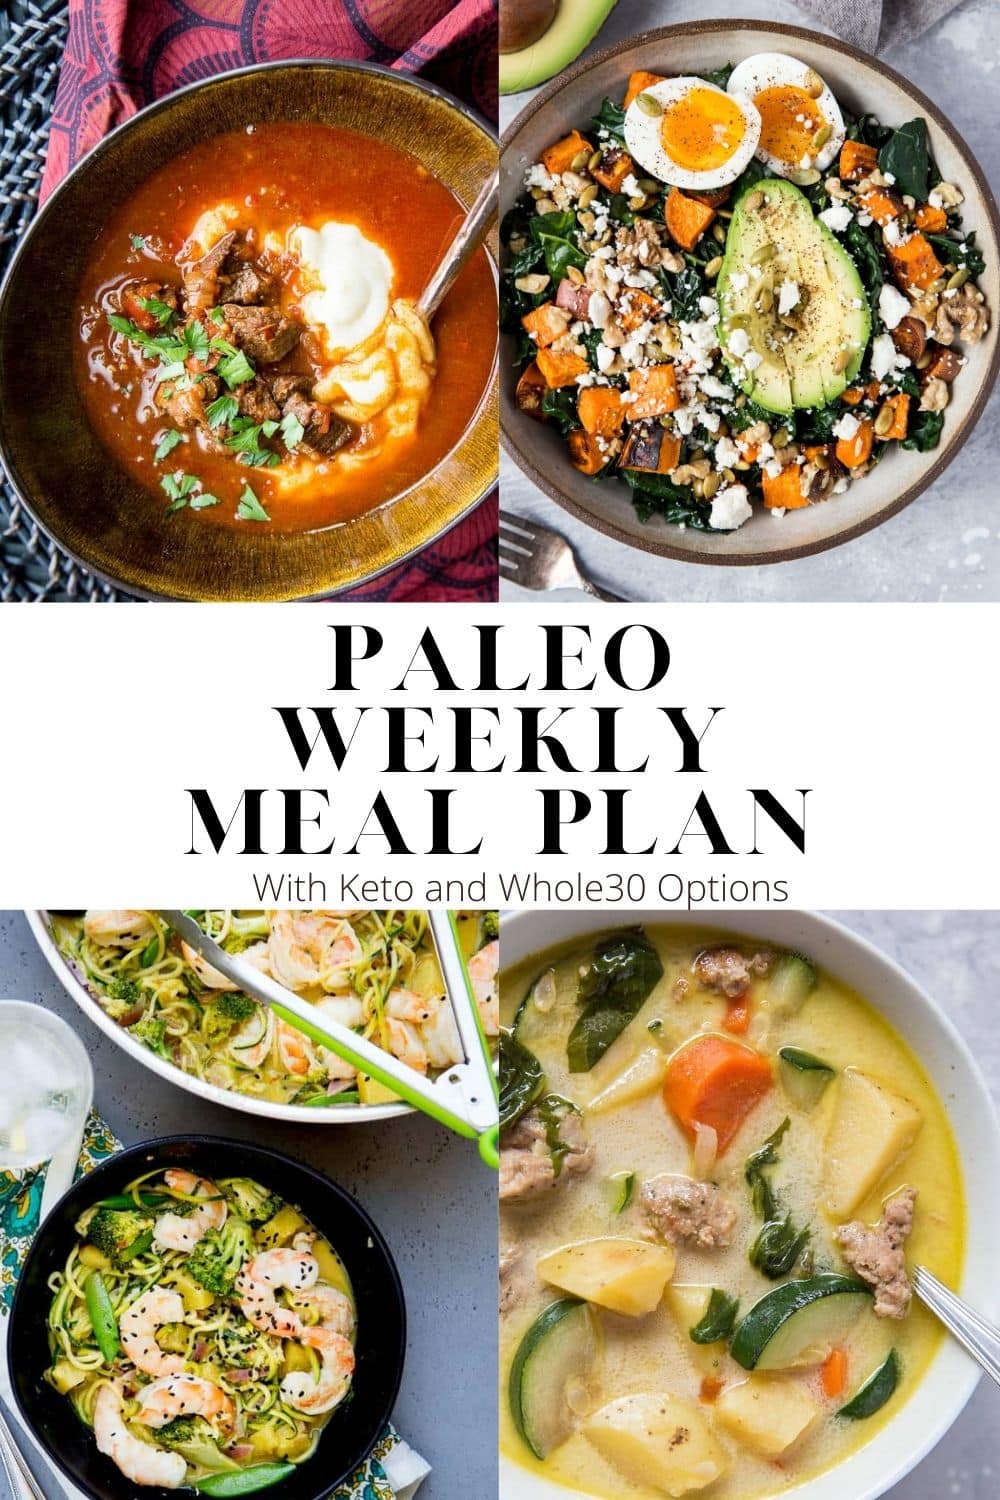 Whole30 & Paleo Frozen Meals with Prices - Cook At Home Mom